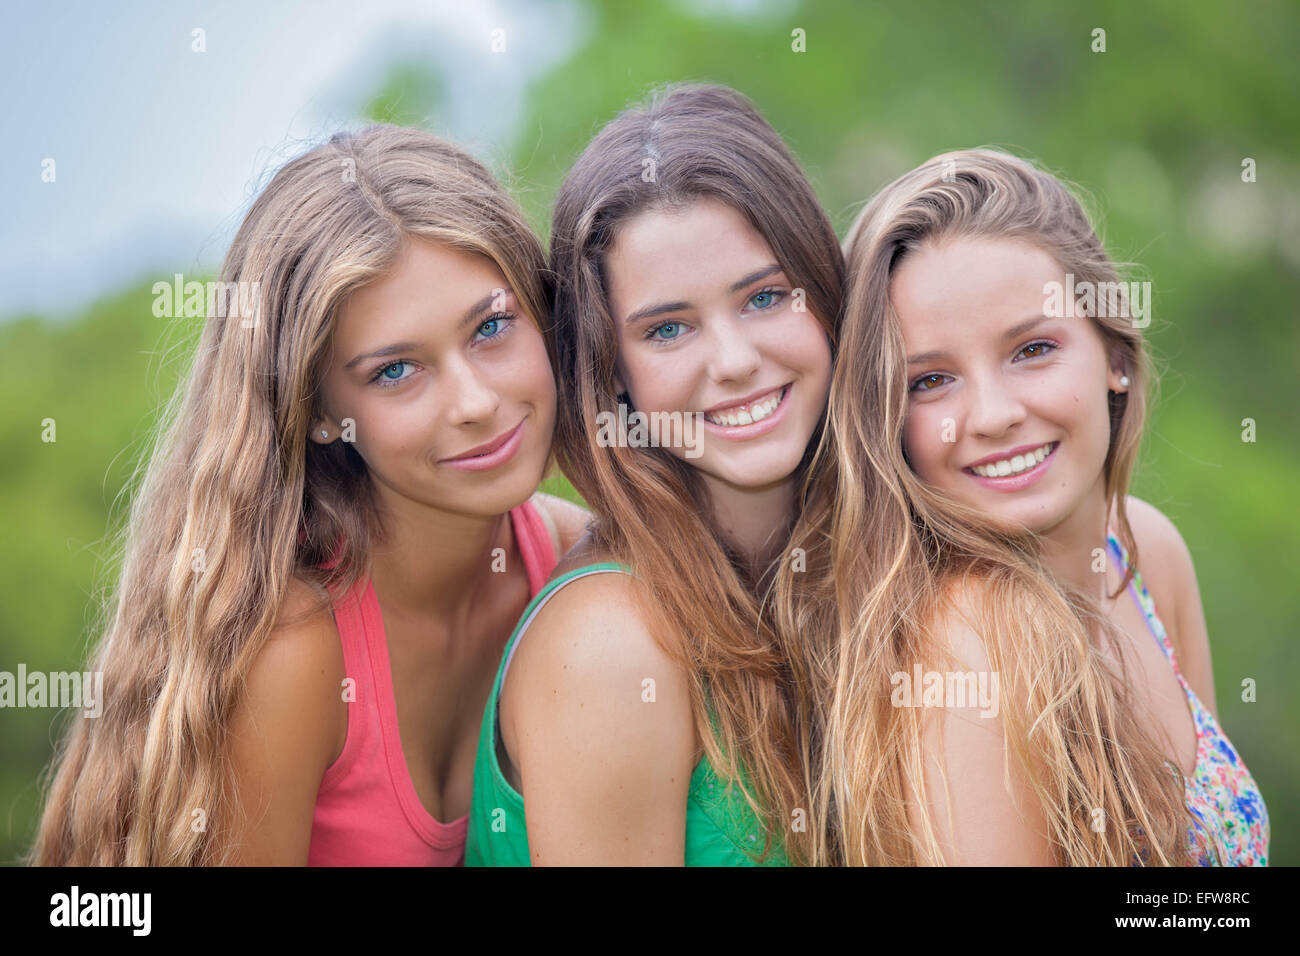 group of healthy teen girls Stock Photo